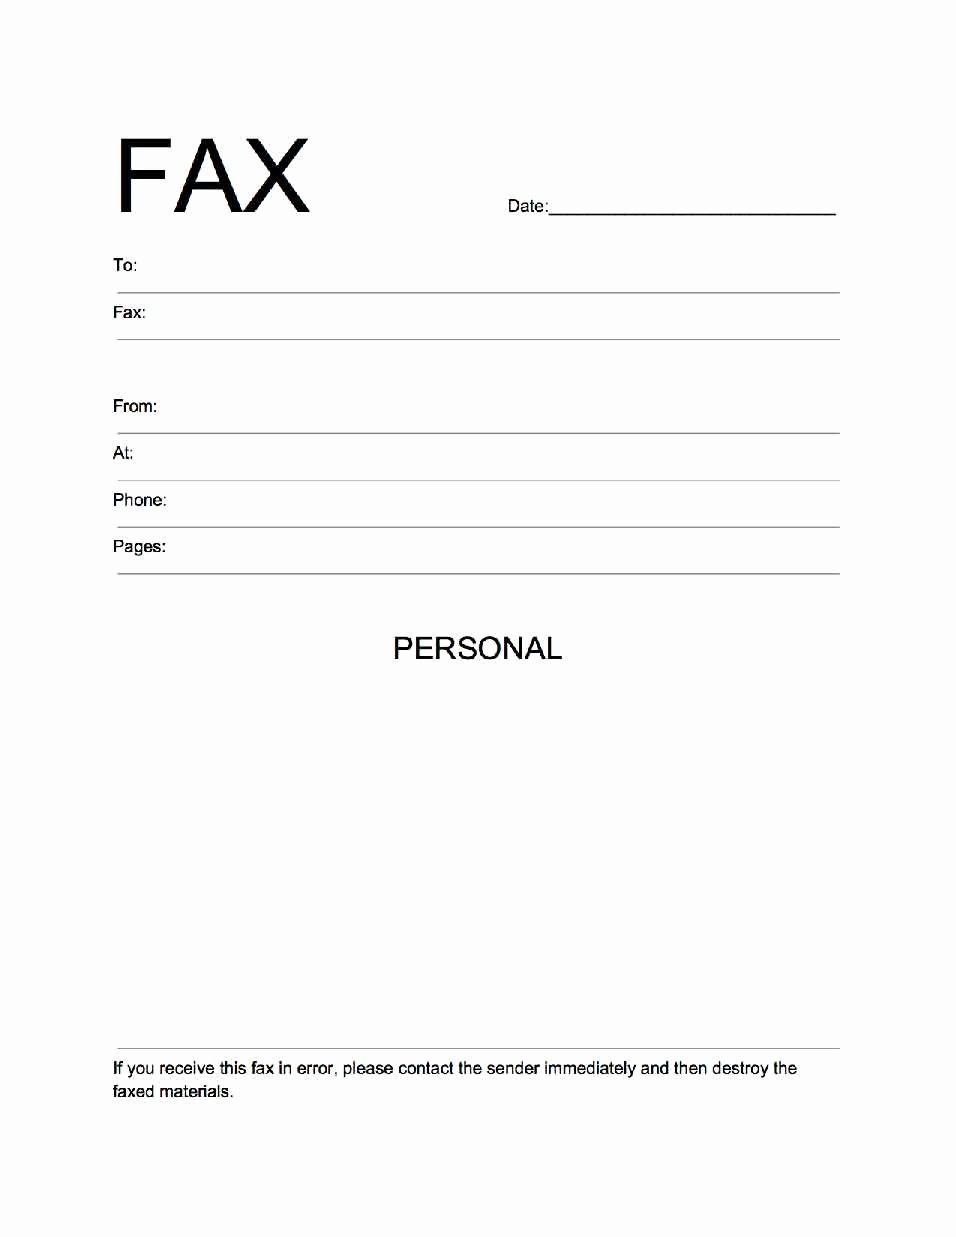 Cover Letter for A Fax Unique Personal Fax Cover Sheet Template